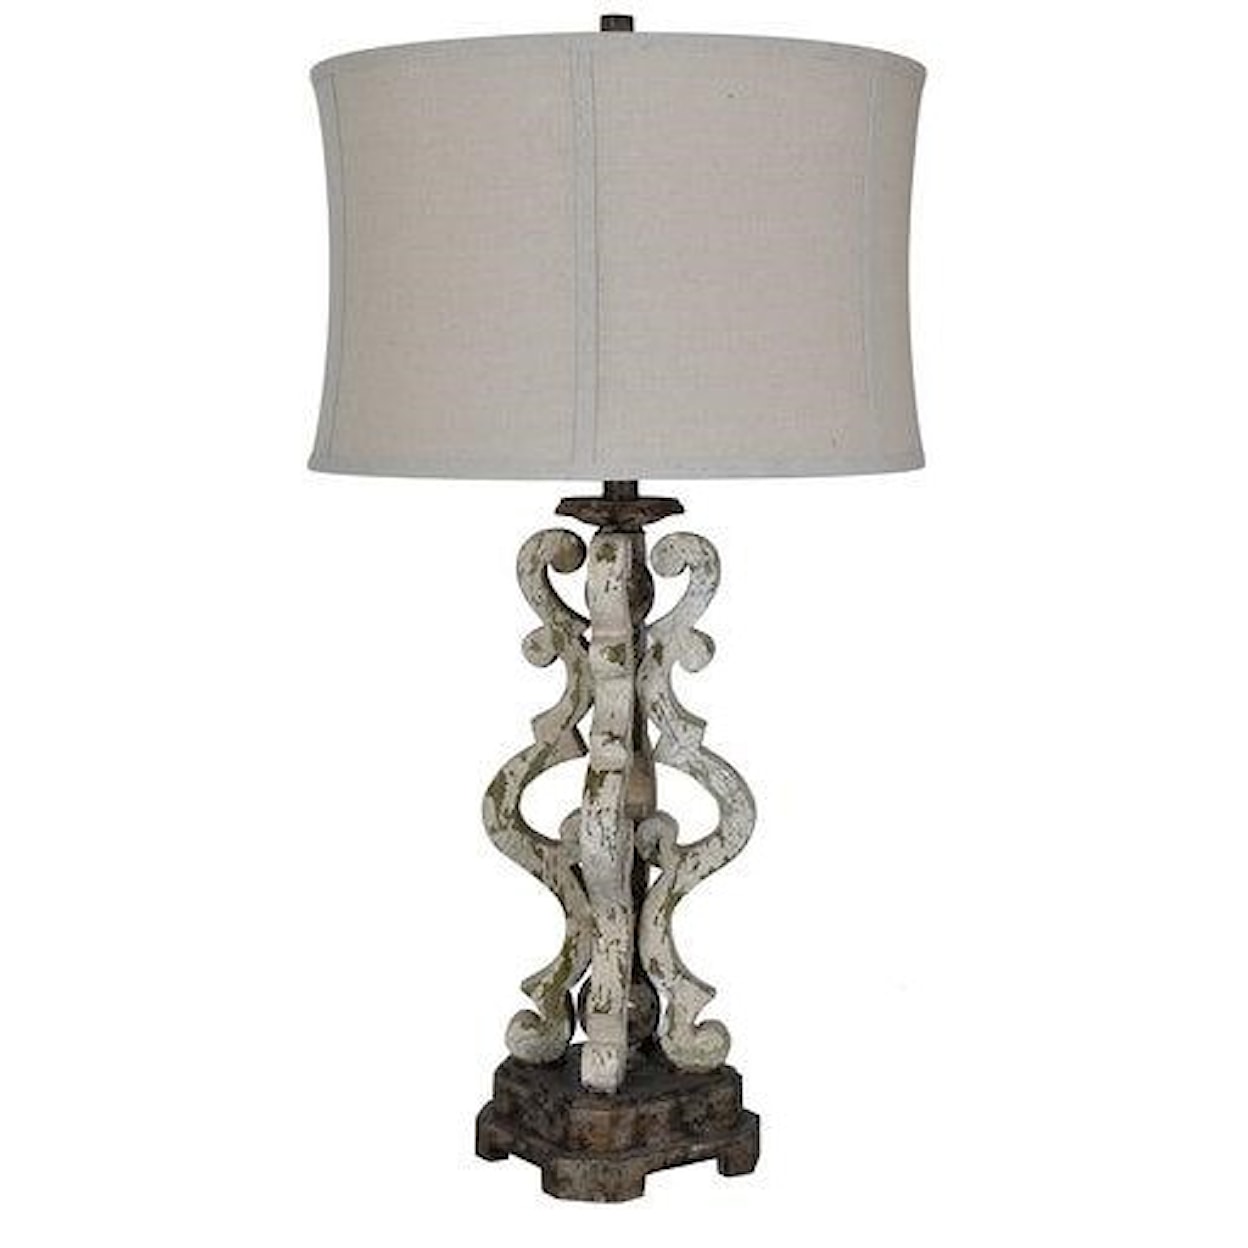 Crestview Collection table lamps Mariposa Corner Table Lamp